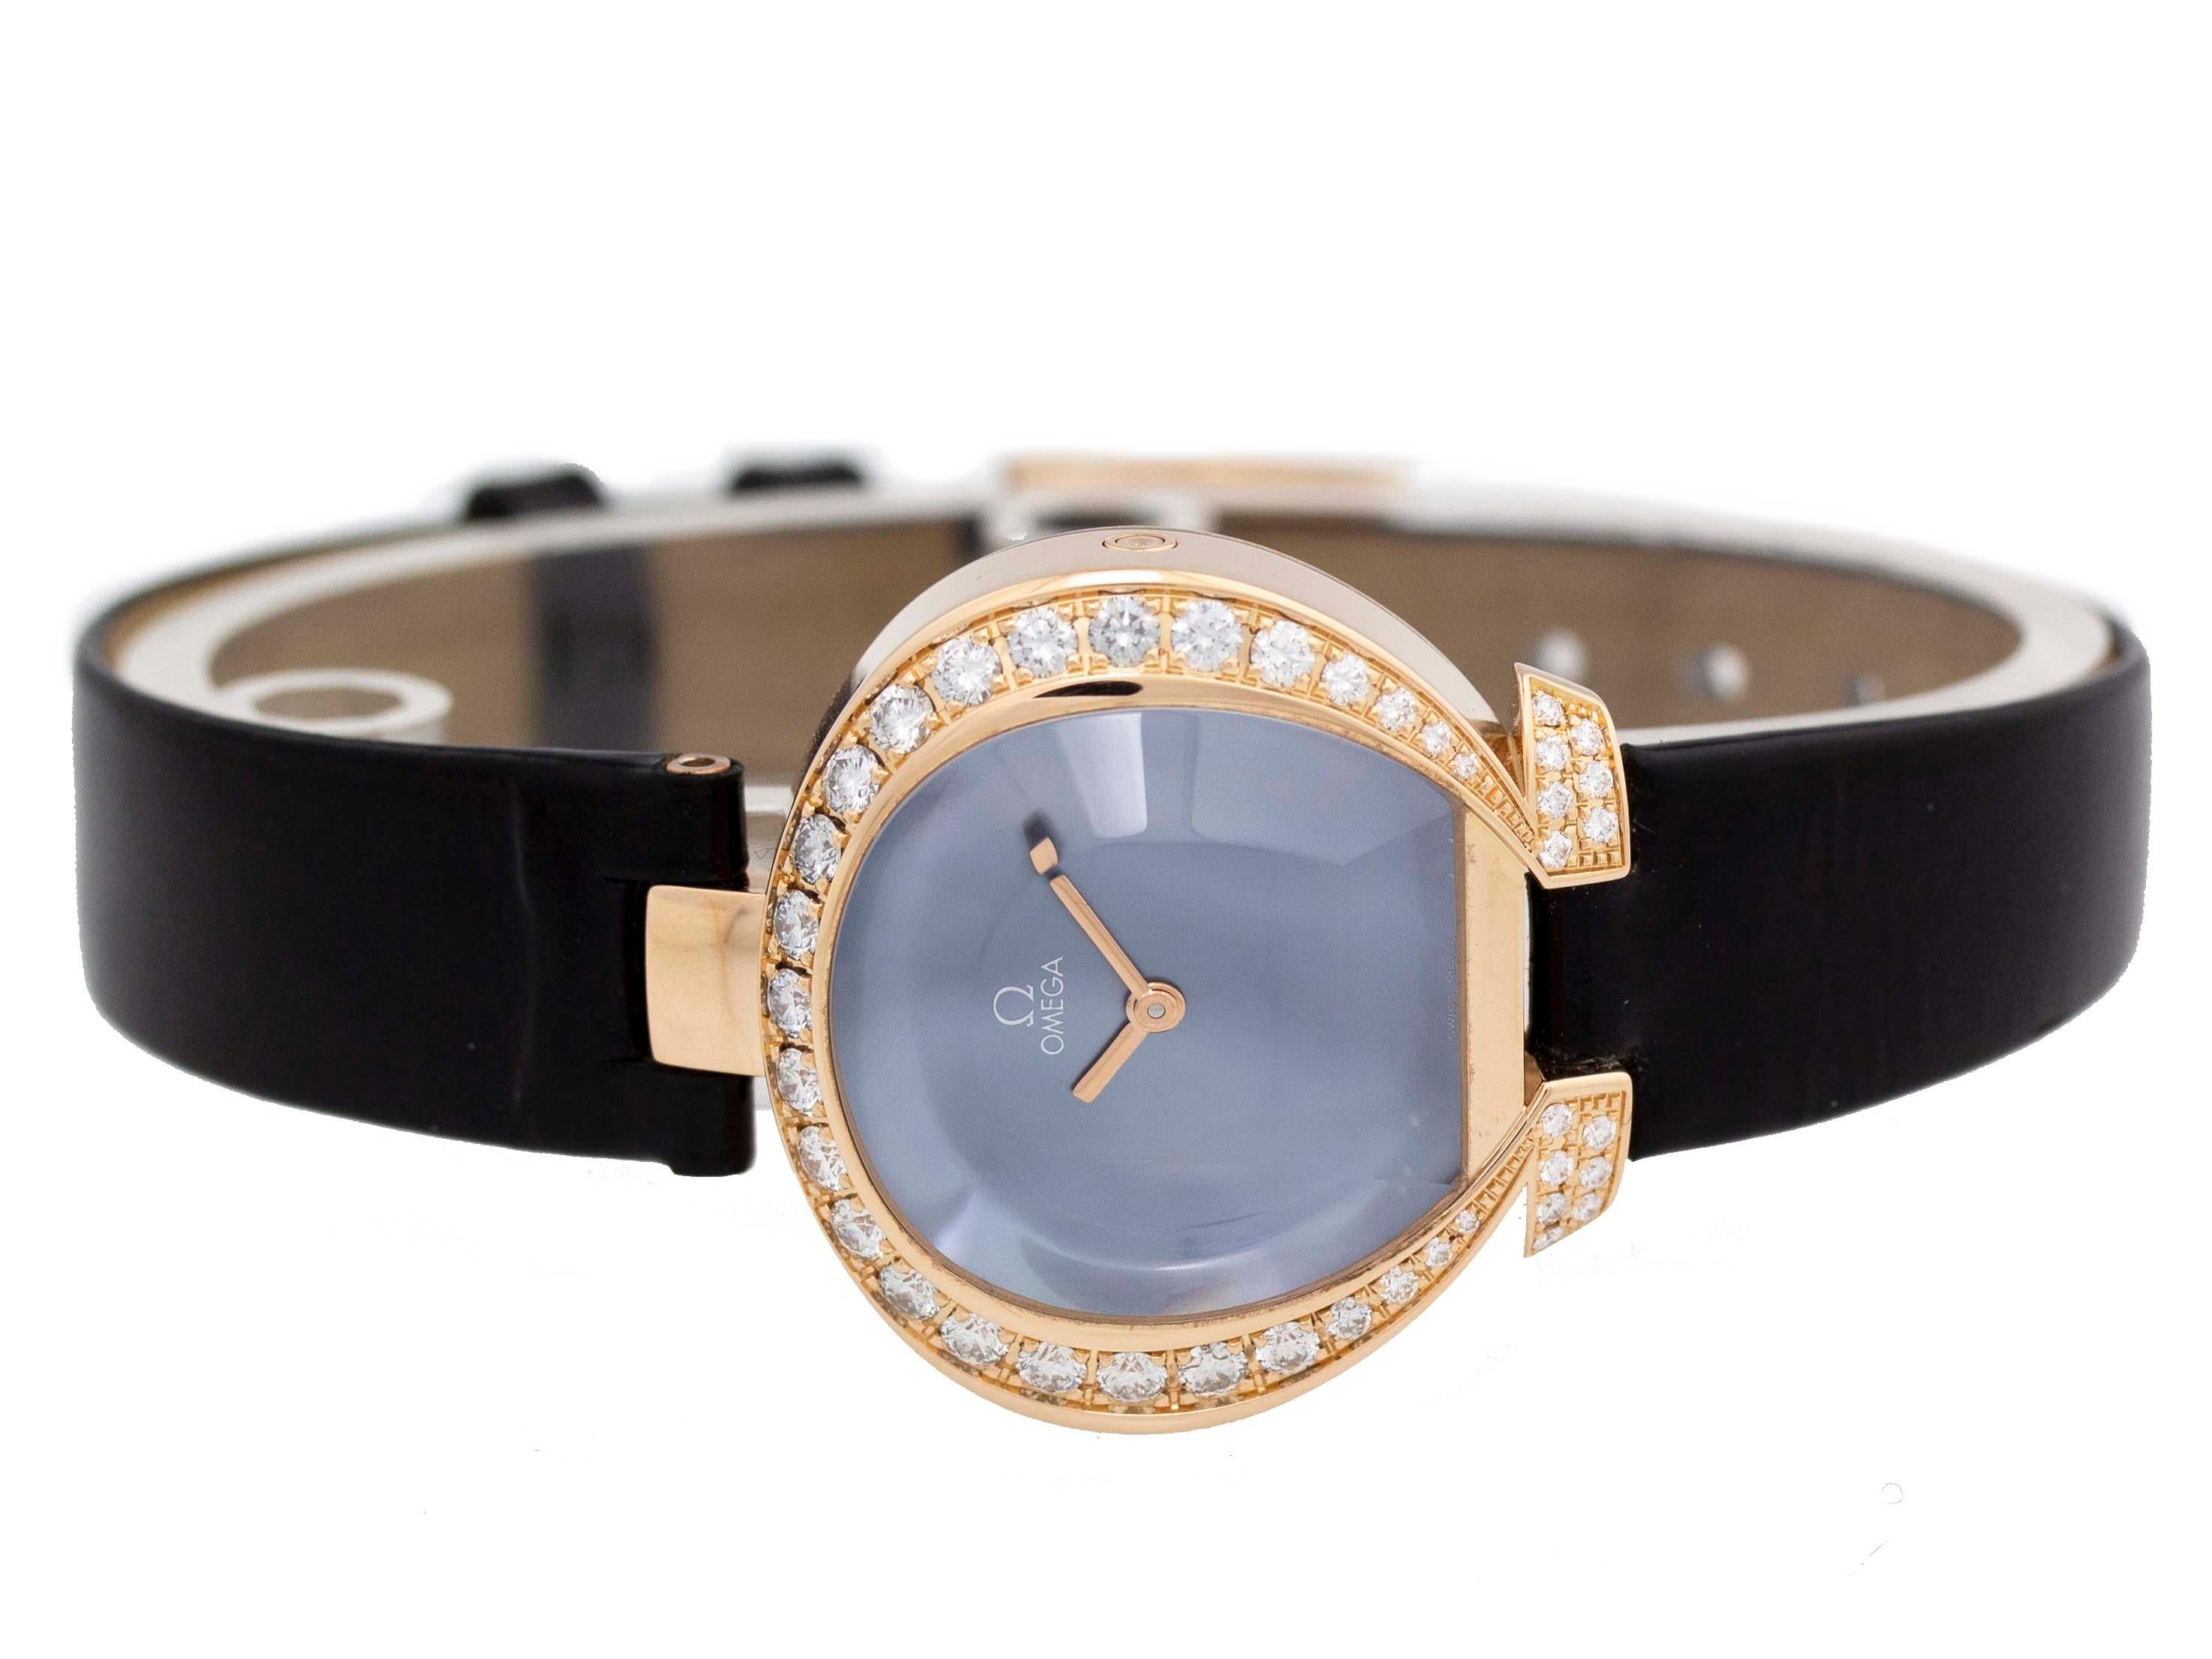 18k red gold Omega Omegamania quartz watch with a 27mm case, blue dial, diamond bezel, and black leather strap with tang buckle. Features include hours and minutes. It comes with Omega Box and a 2 Year